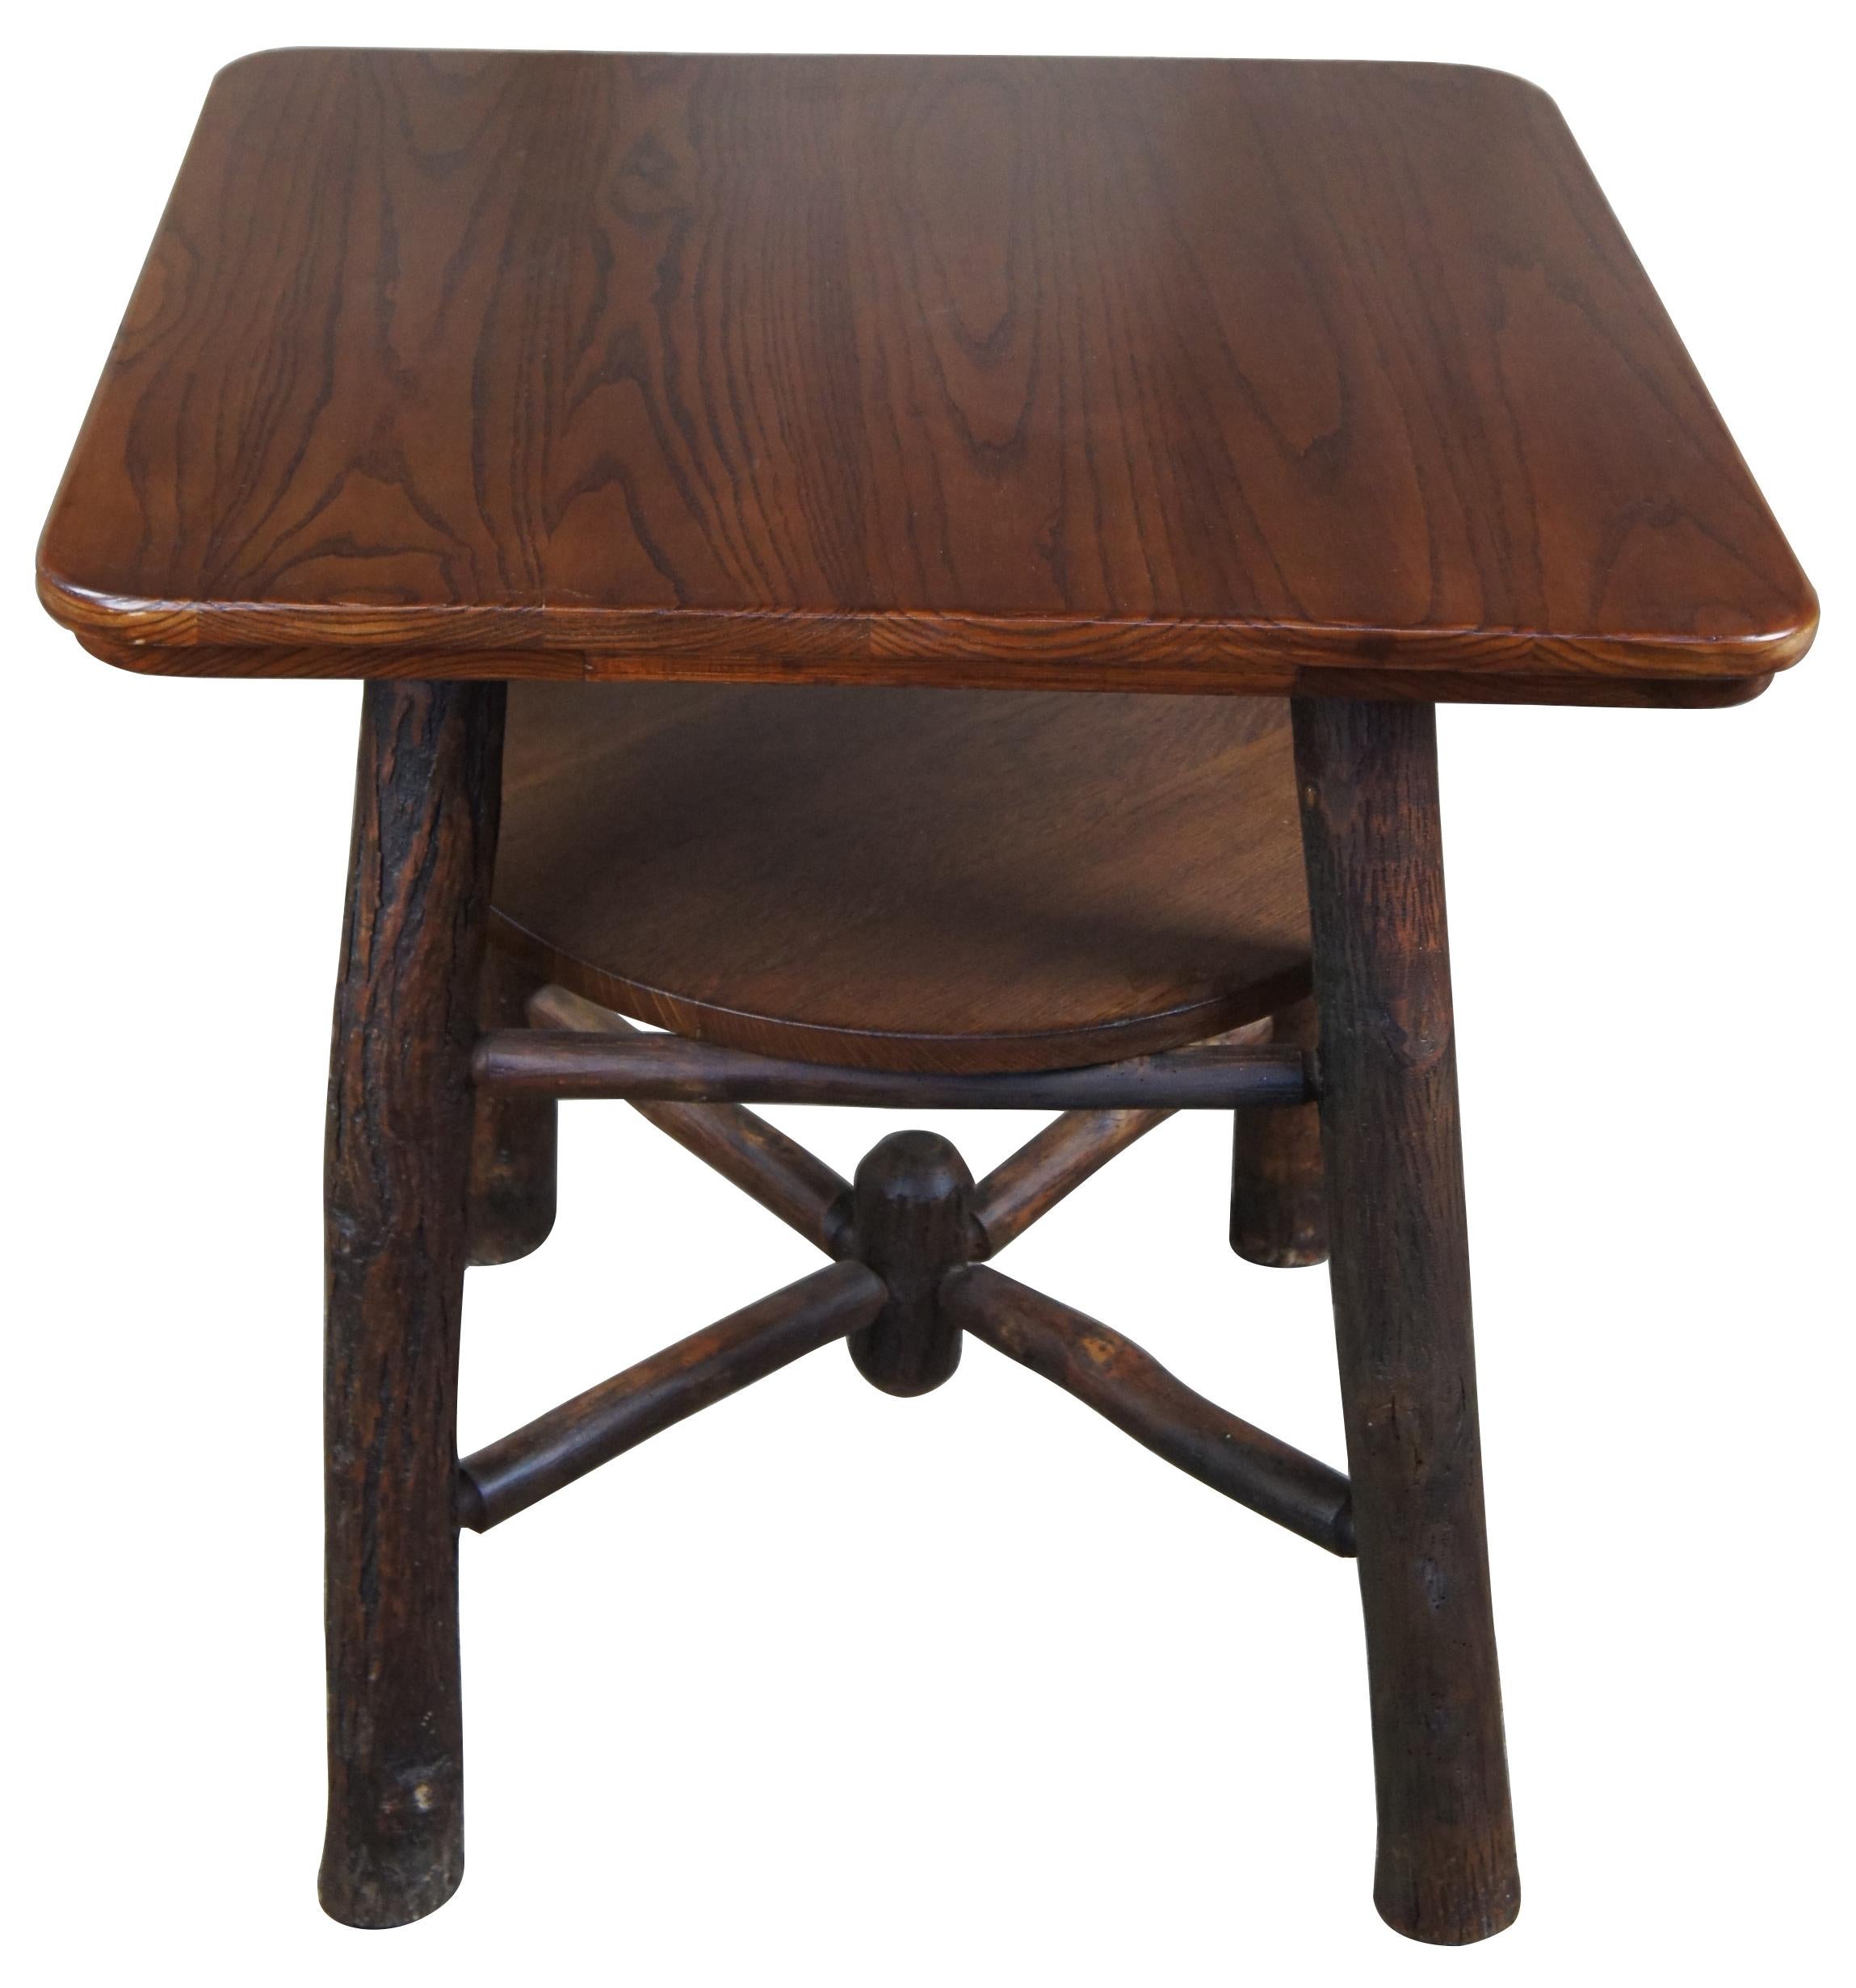 American Rustic Hickory Furniture Company Game Table & Chairs No 103 19 Adirondack Lodge